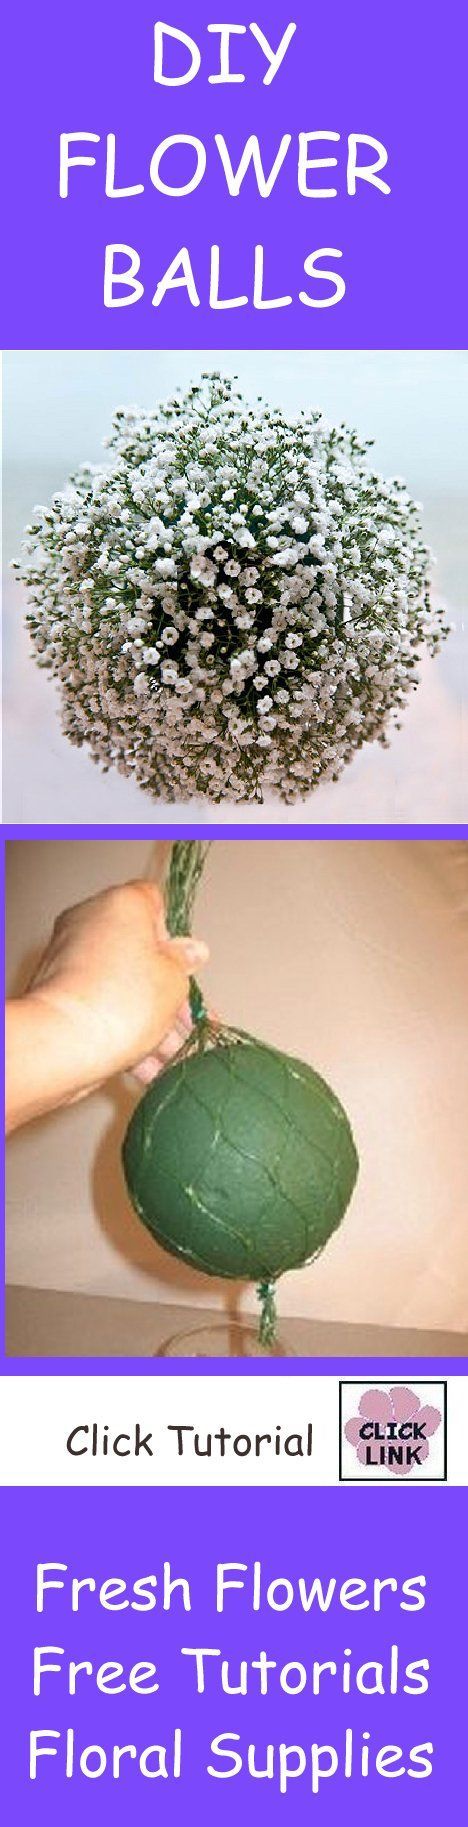 How to Make a Fresh Baby’s Breath Flower Ball – Attendent pomanders, pew decorations or hanging balls at the ceremony are much